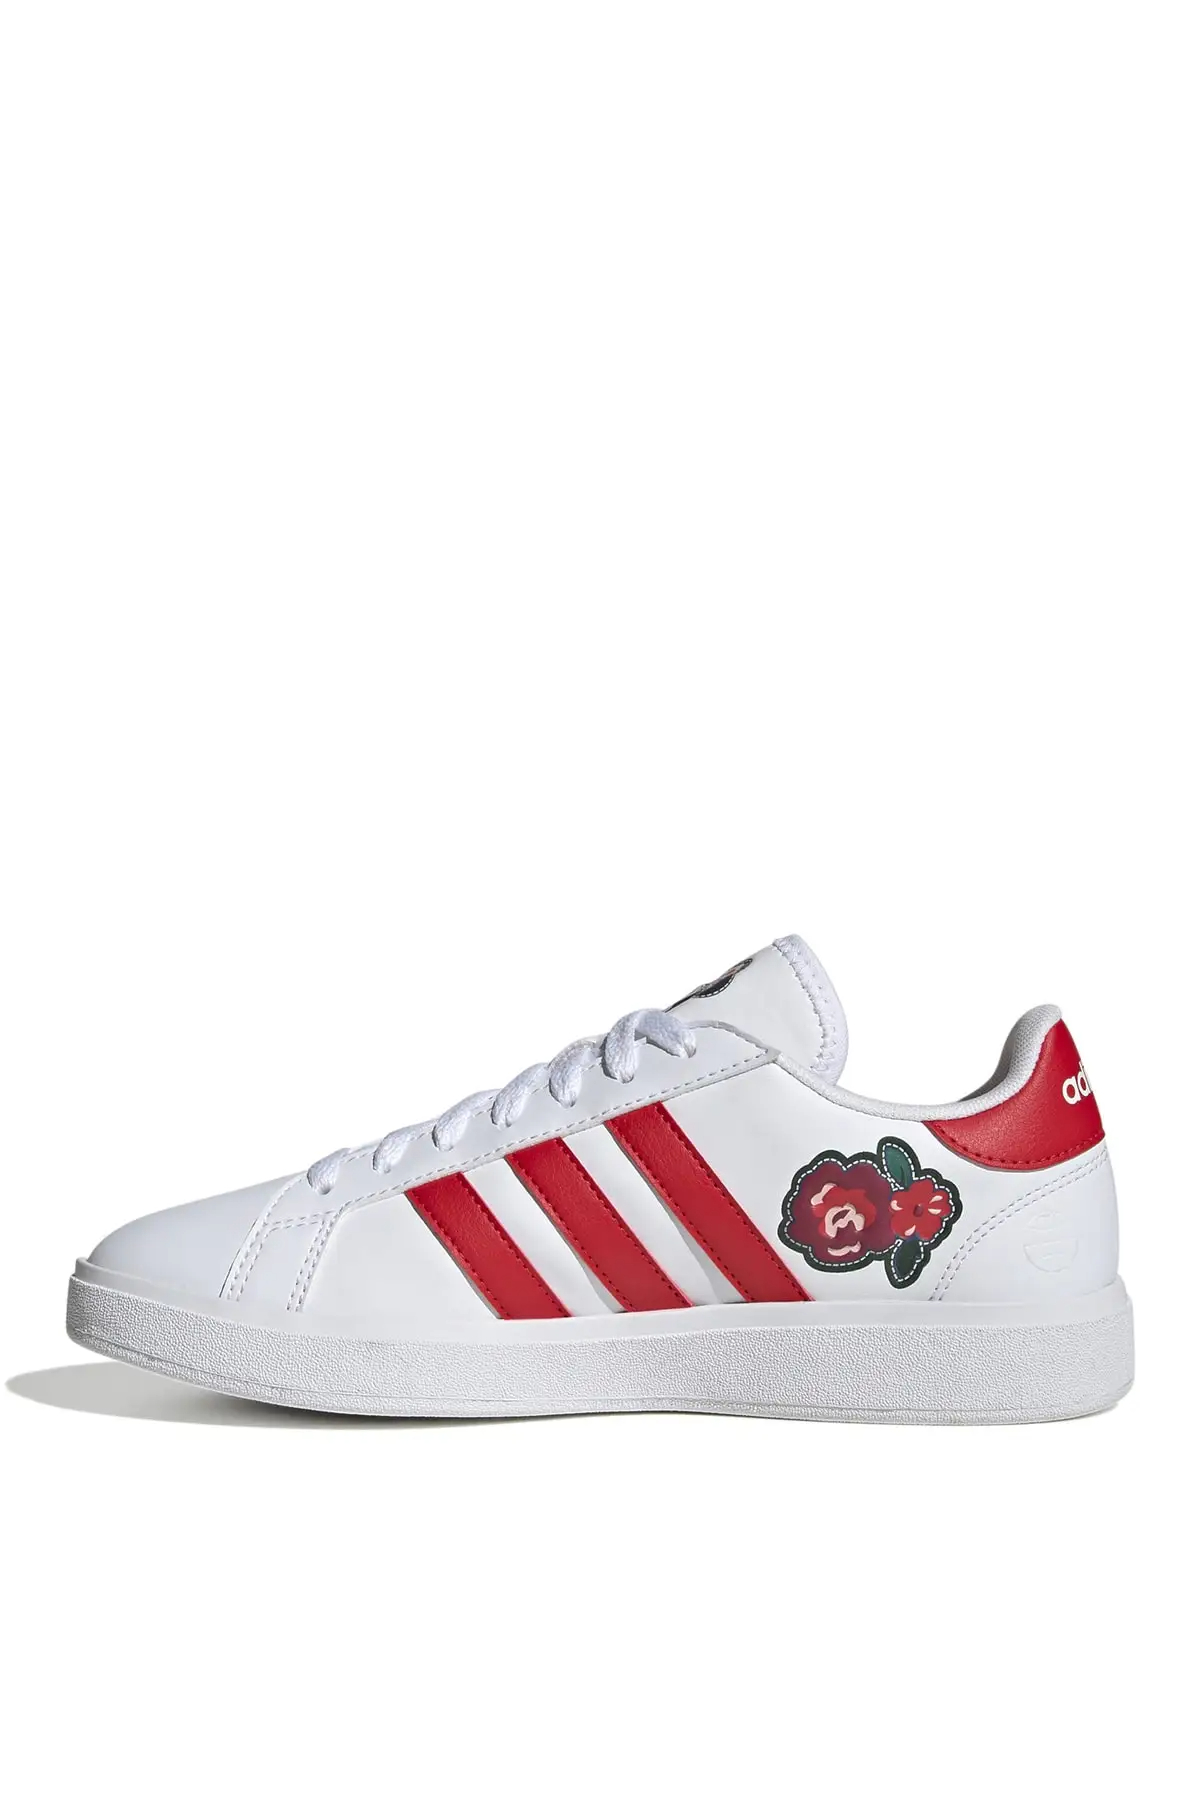 women's red adidas shoes